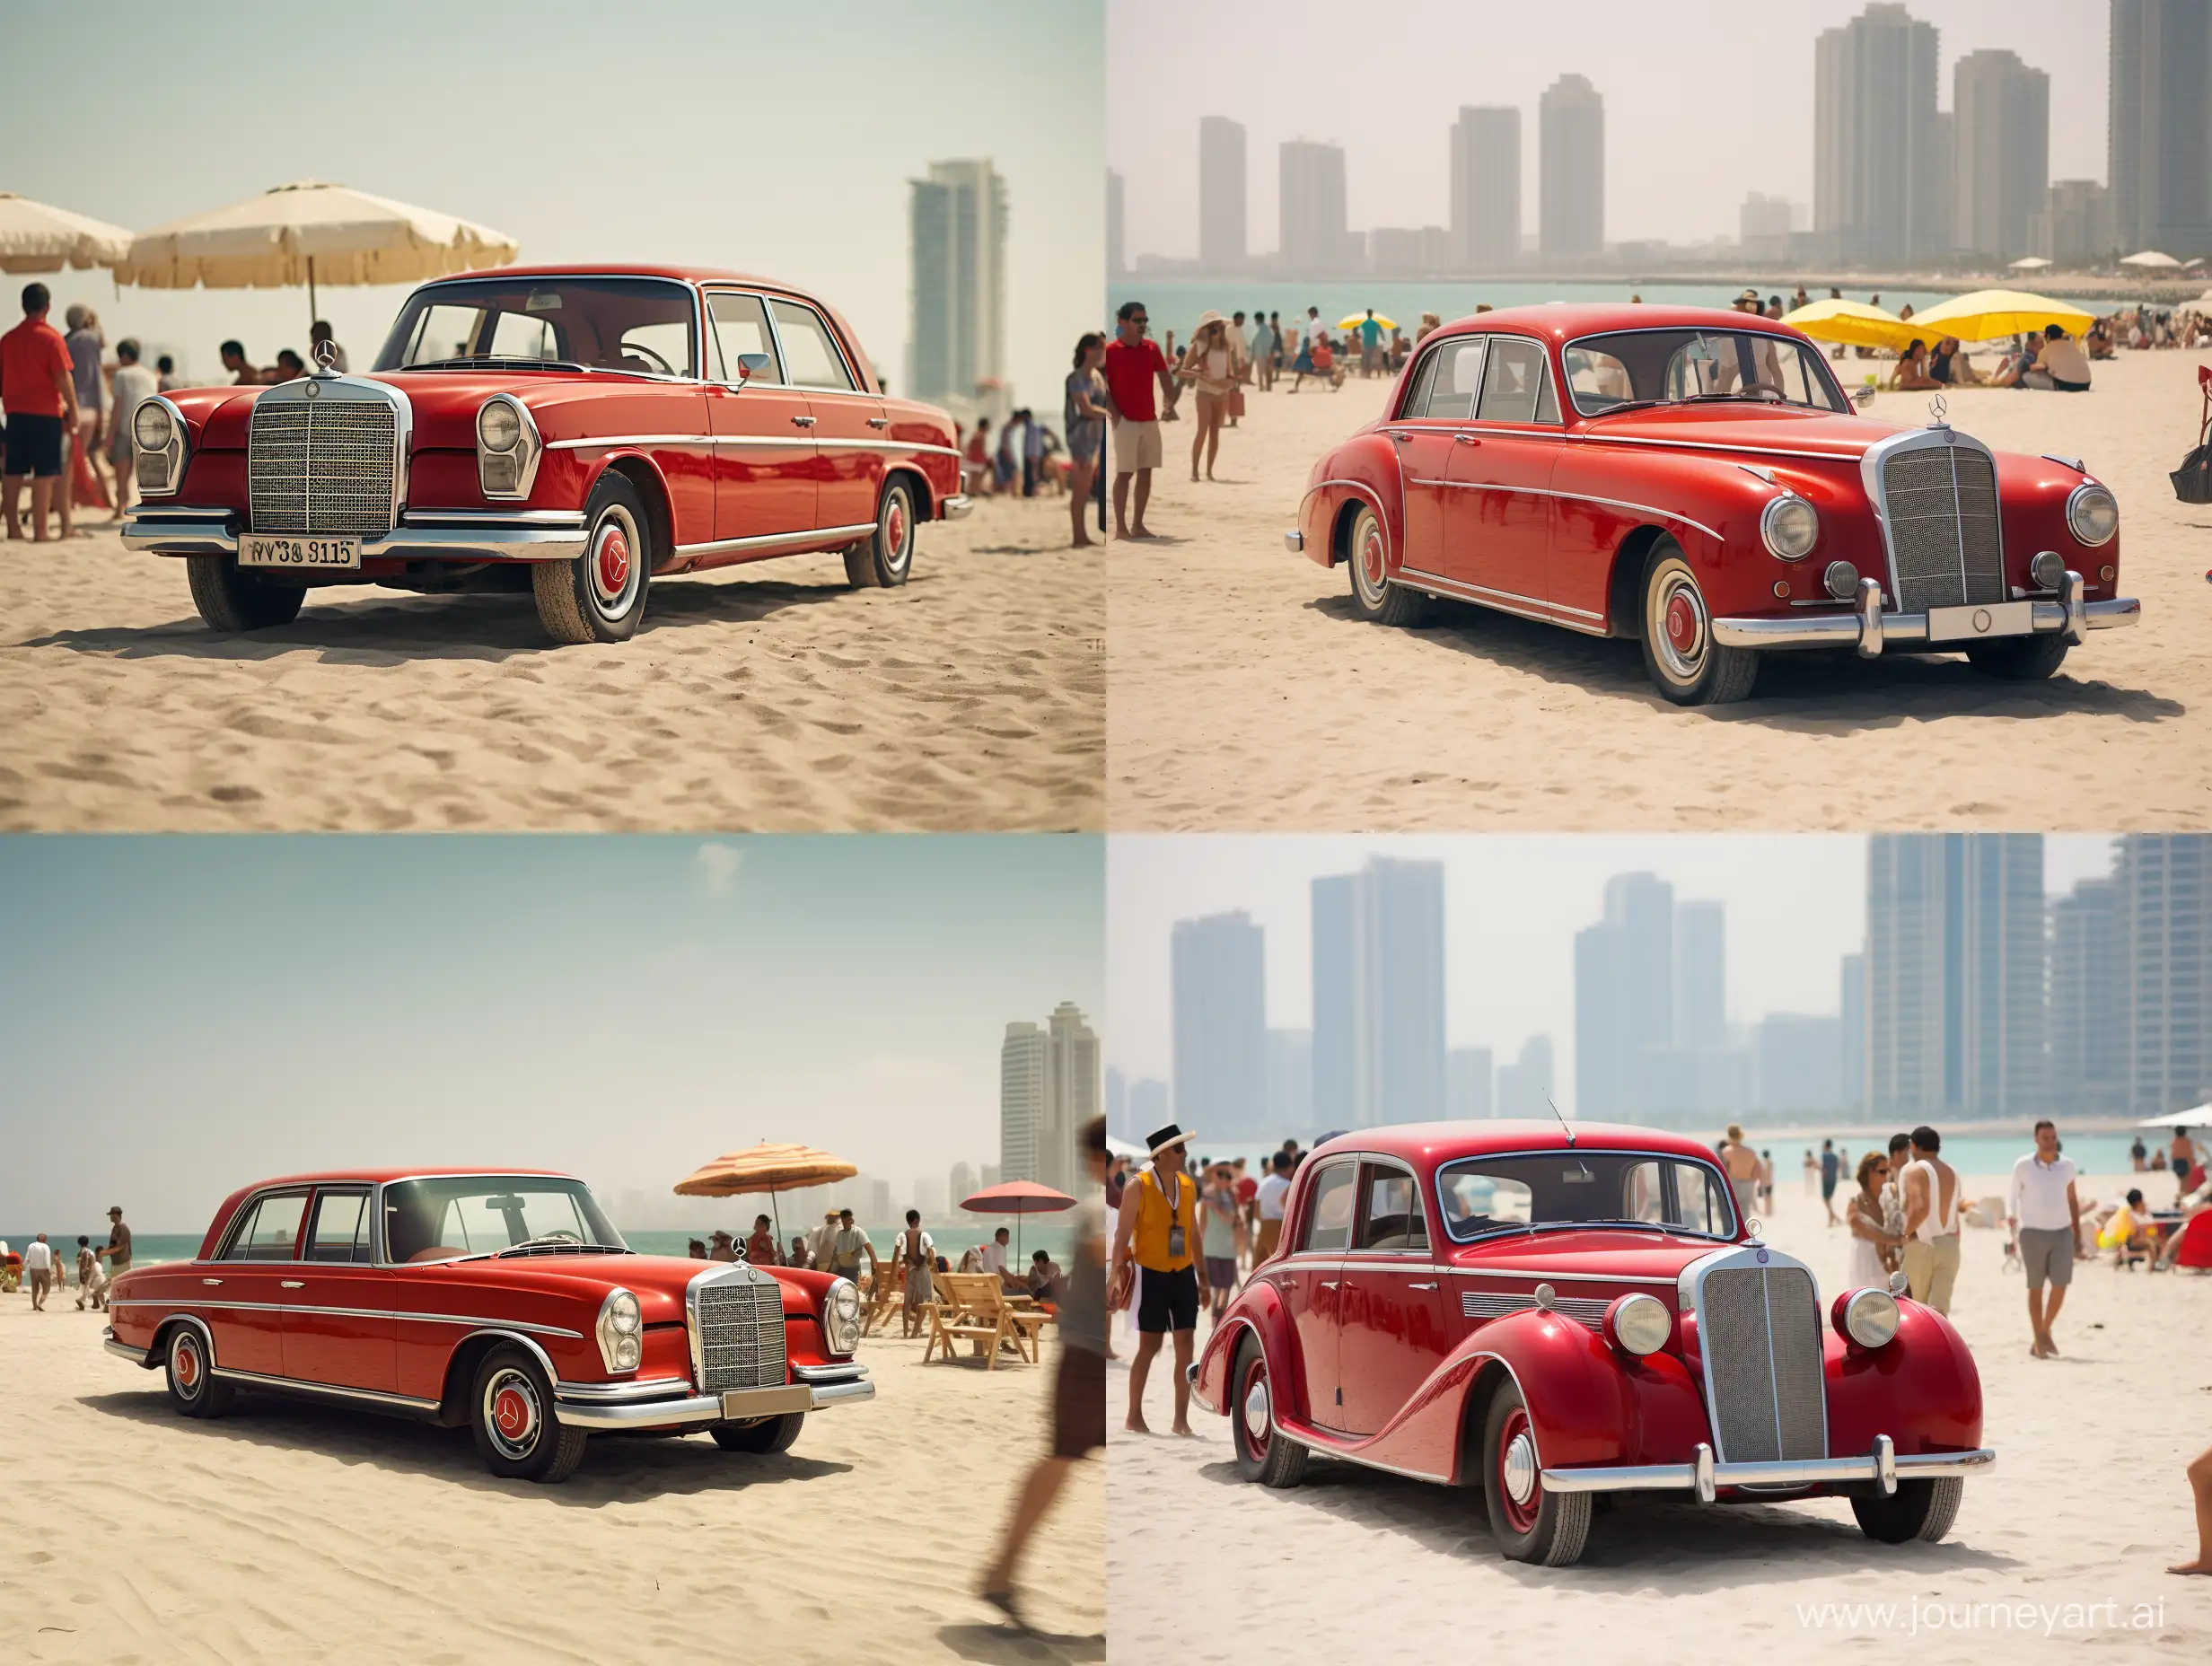 old red mercedes 123 type on the beach in Dubai umbrellas, people on the beach, skyscrapers